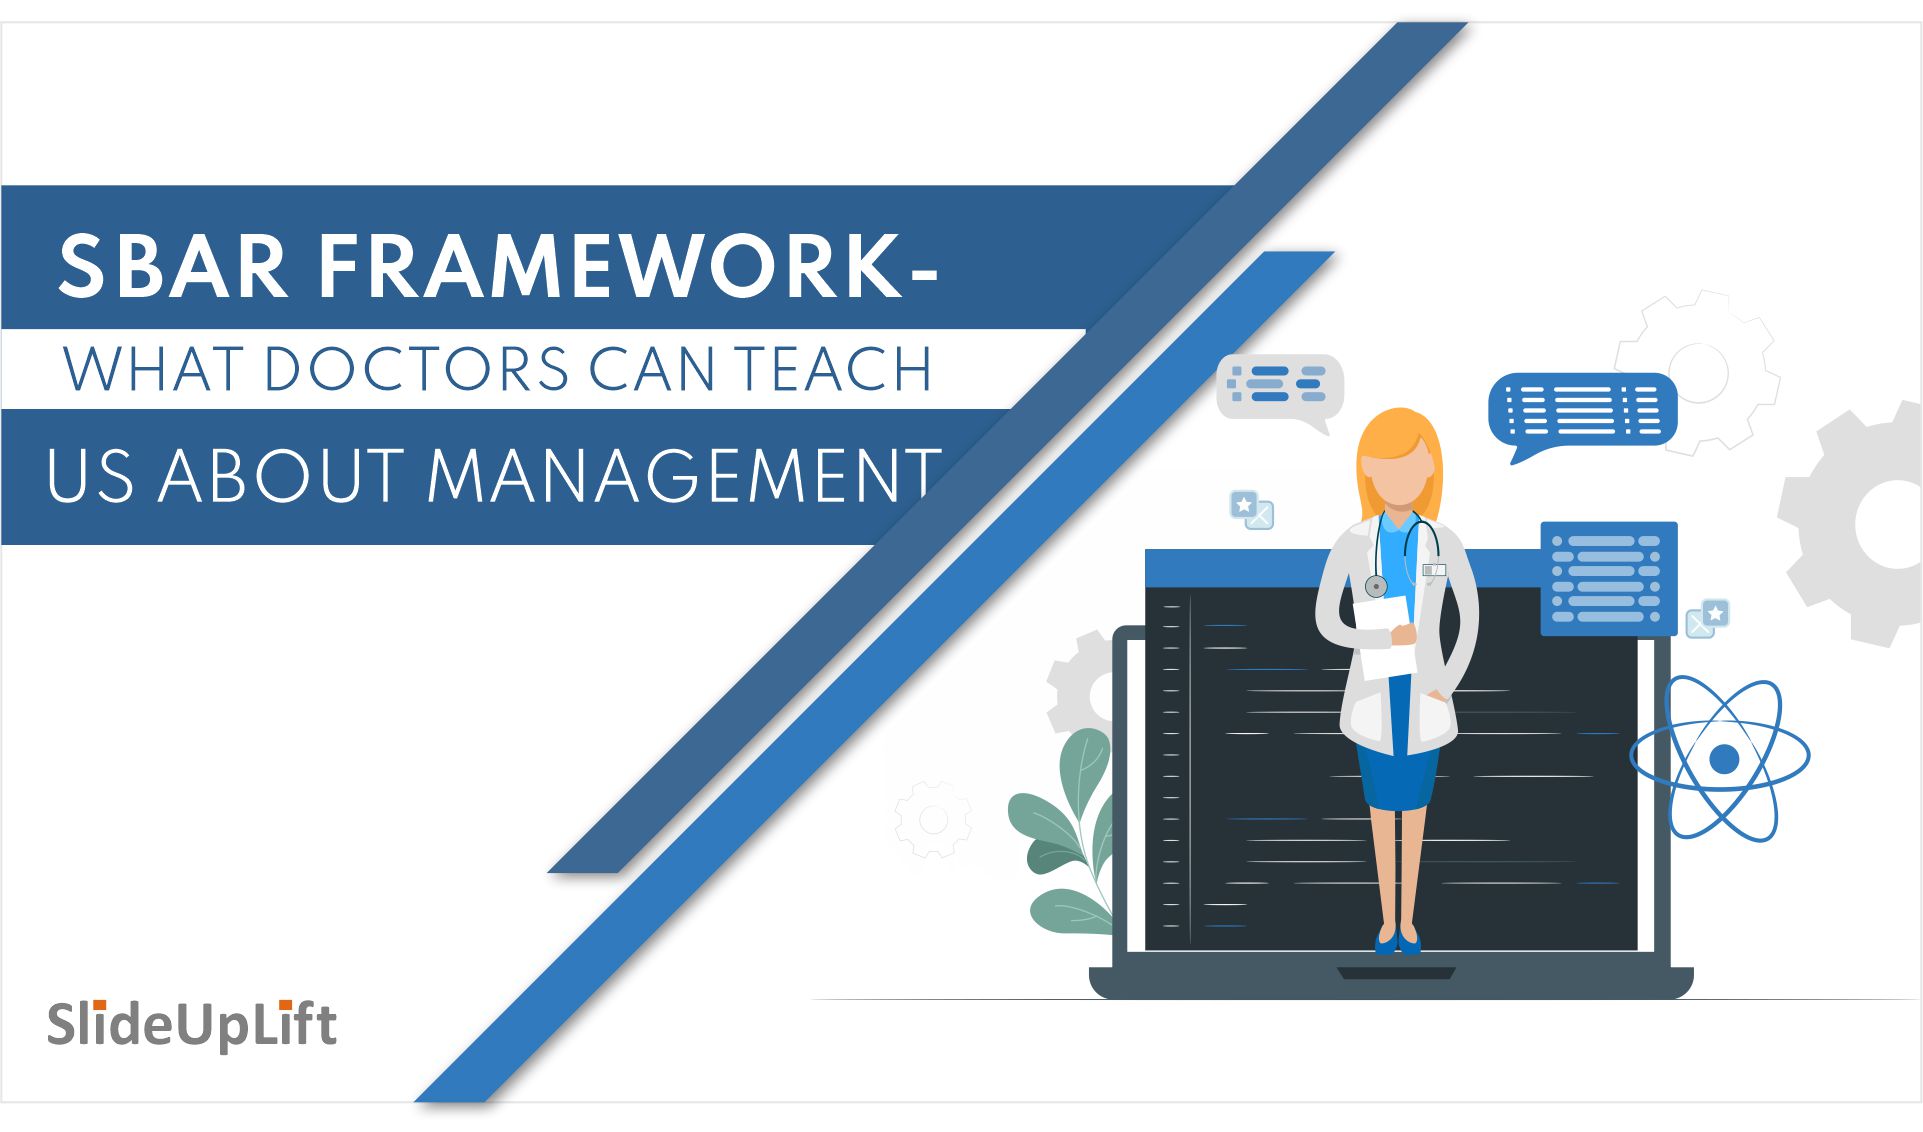 SBAR Framework- What Doctors Can Teach Us About Management